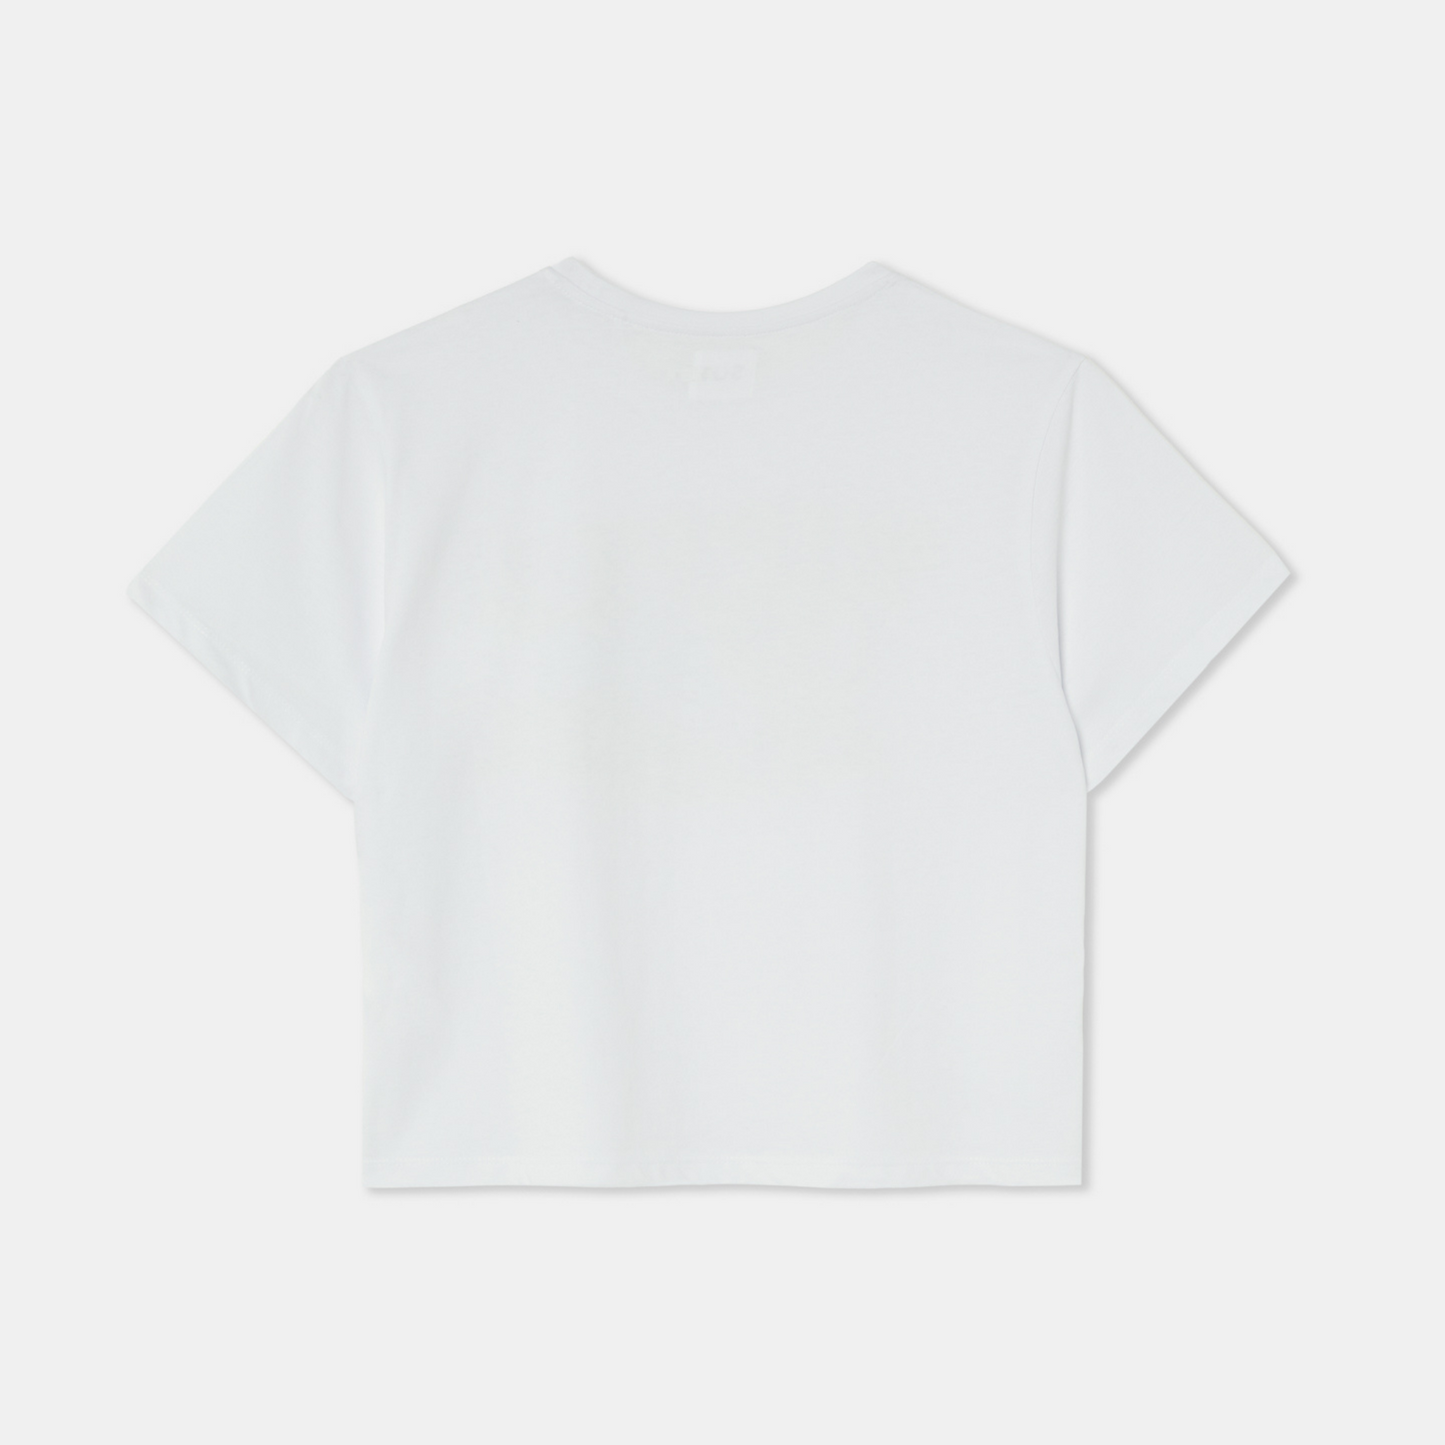 T-shirt middle crop white back